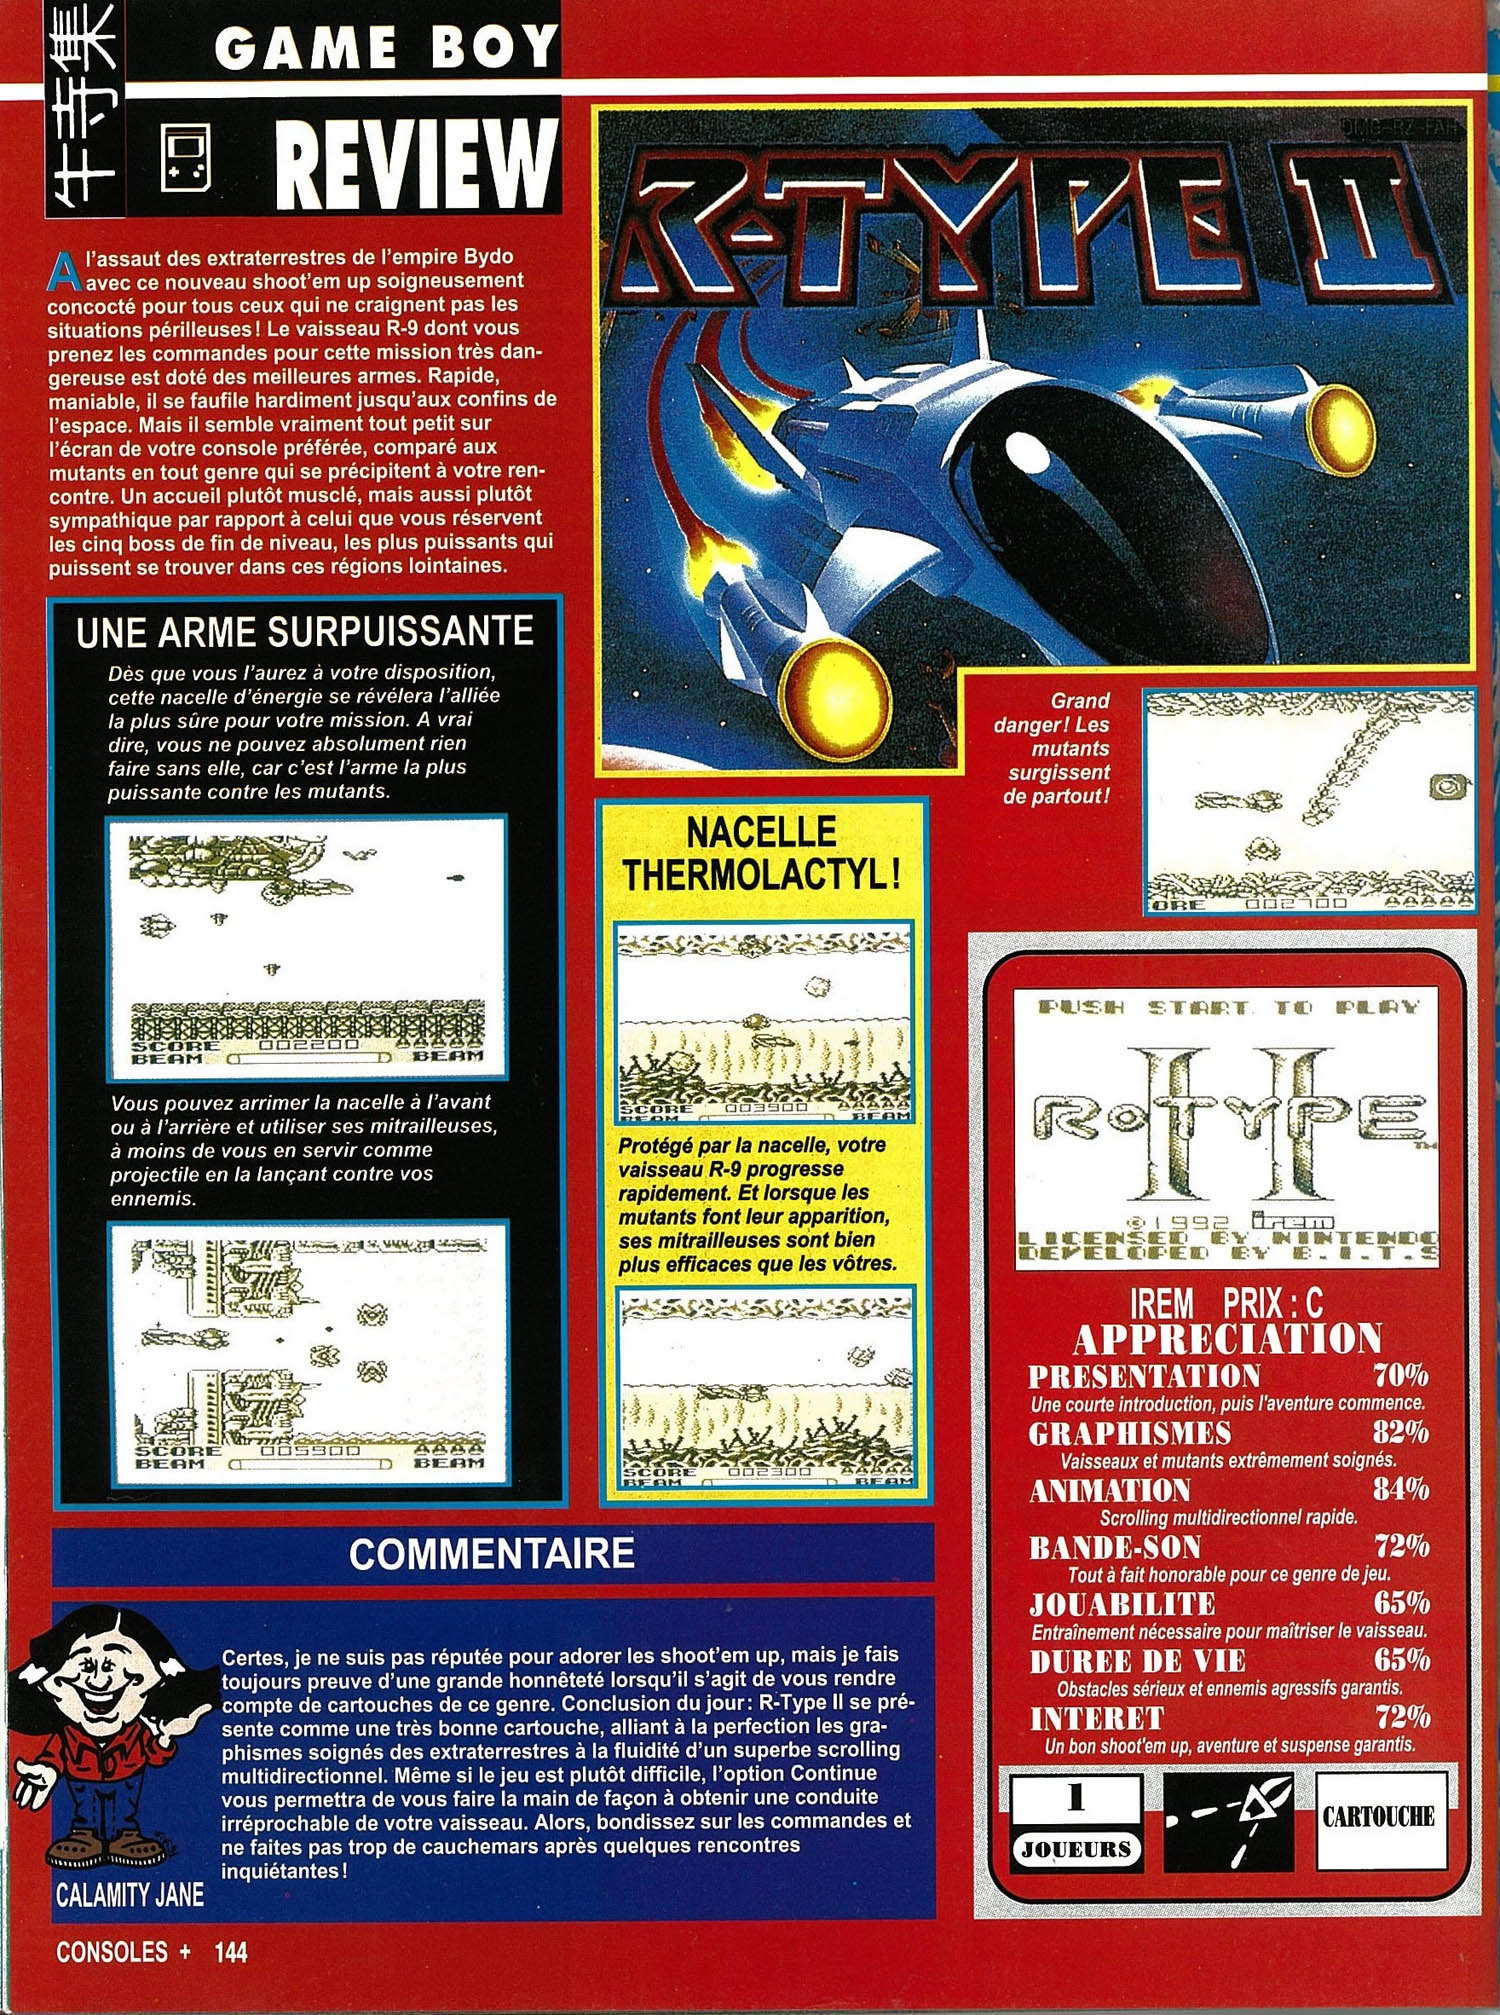 tests/1181/Consoles + 018 - Page 144 (mars 1993).jpg